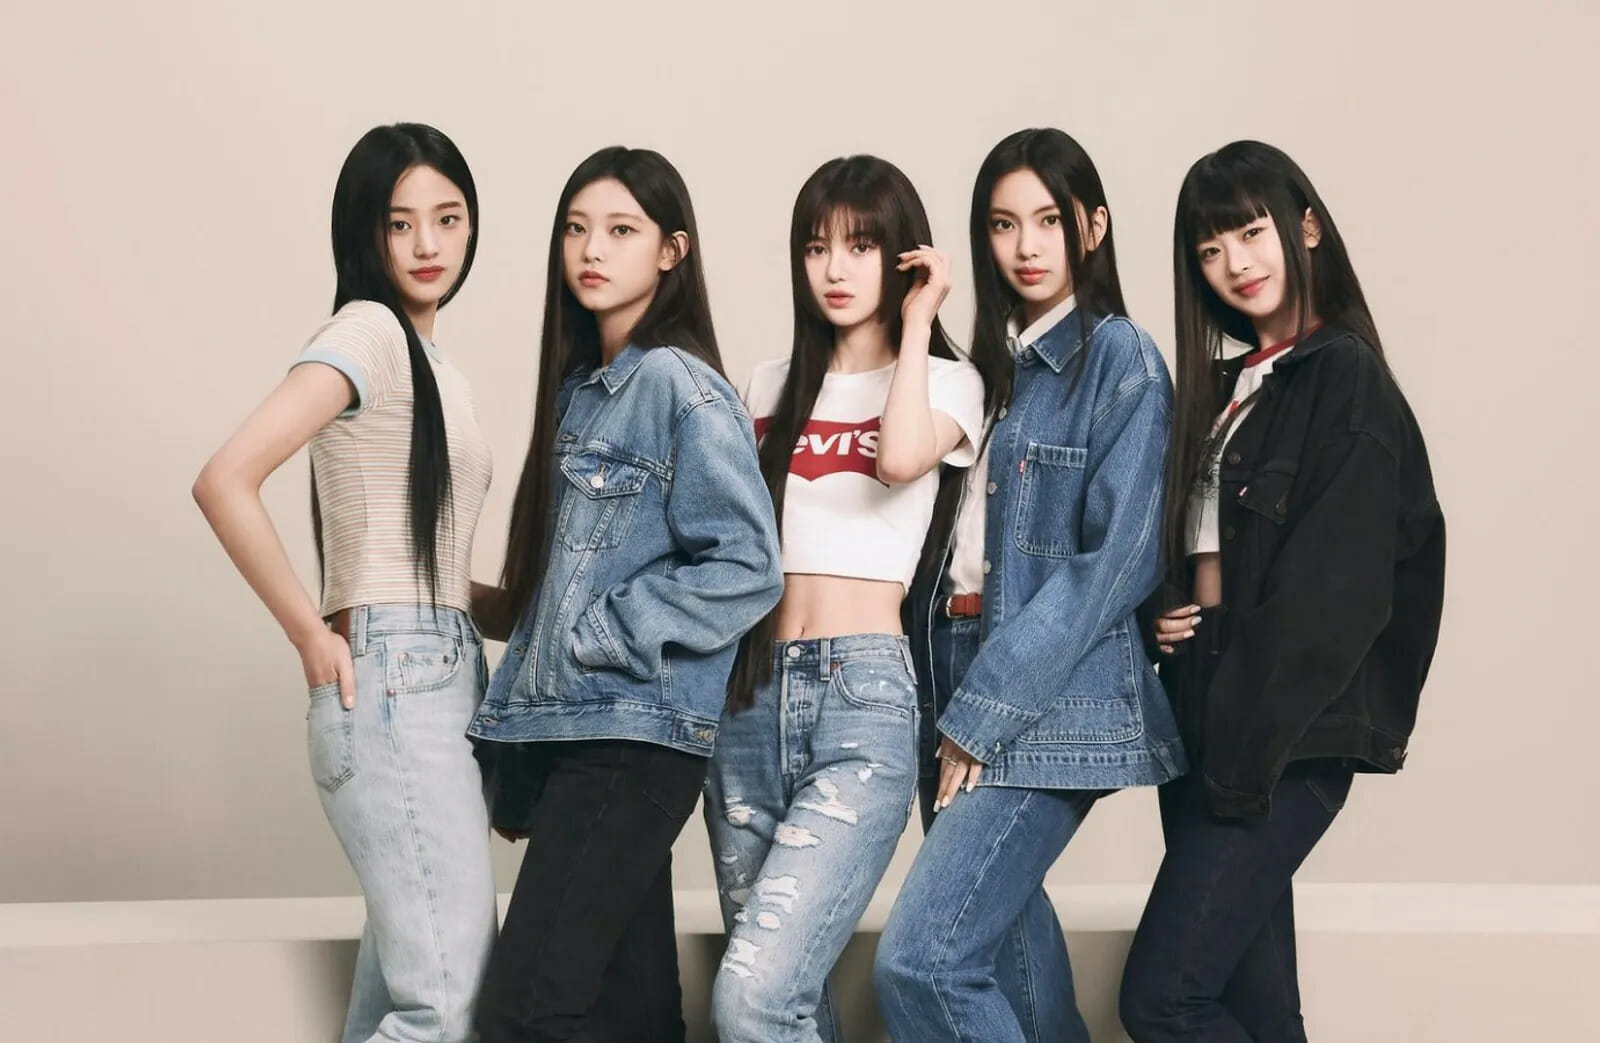 K-pop girl group, NewJeans, are ready for wear as the famed denim house Levi's latest global brand ambassador. The Gen-Z members-- Hanni, Minji, Hearin, Danielle and Hyein-- join the brand’s 150th anniversary celebrations of their Levi’s 501 jeans.